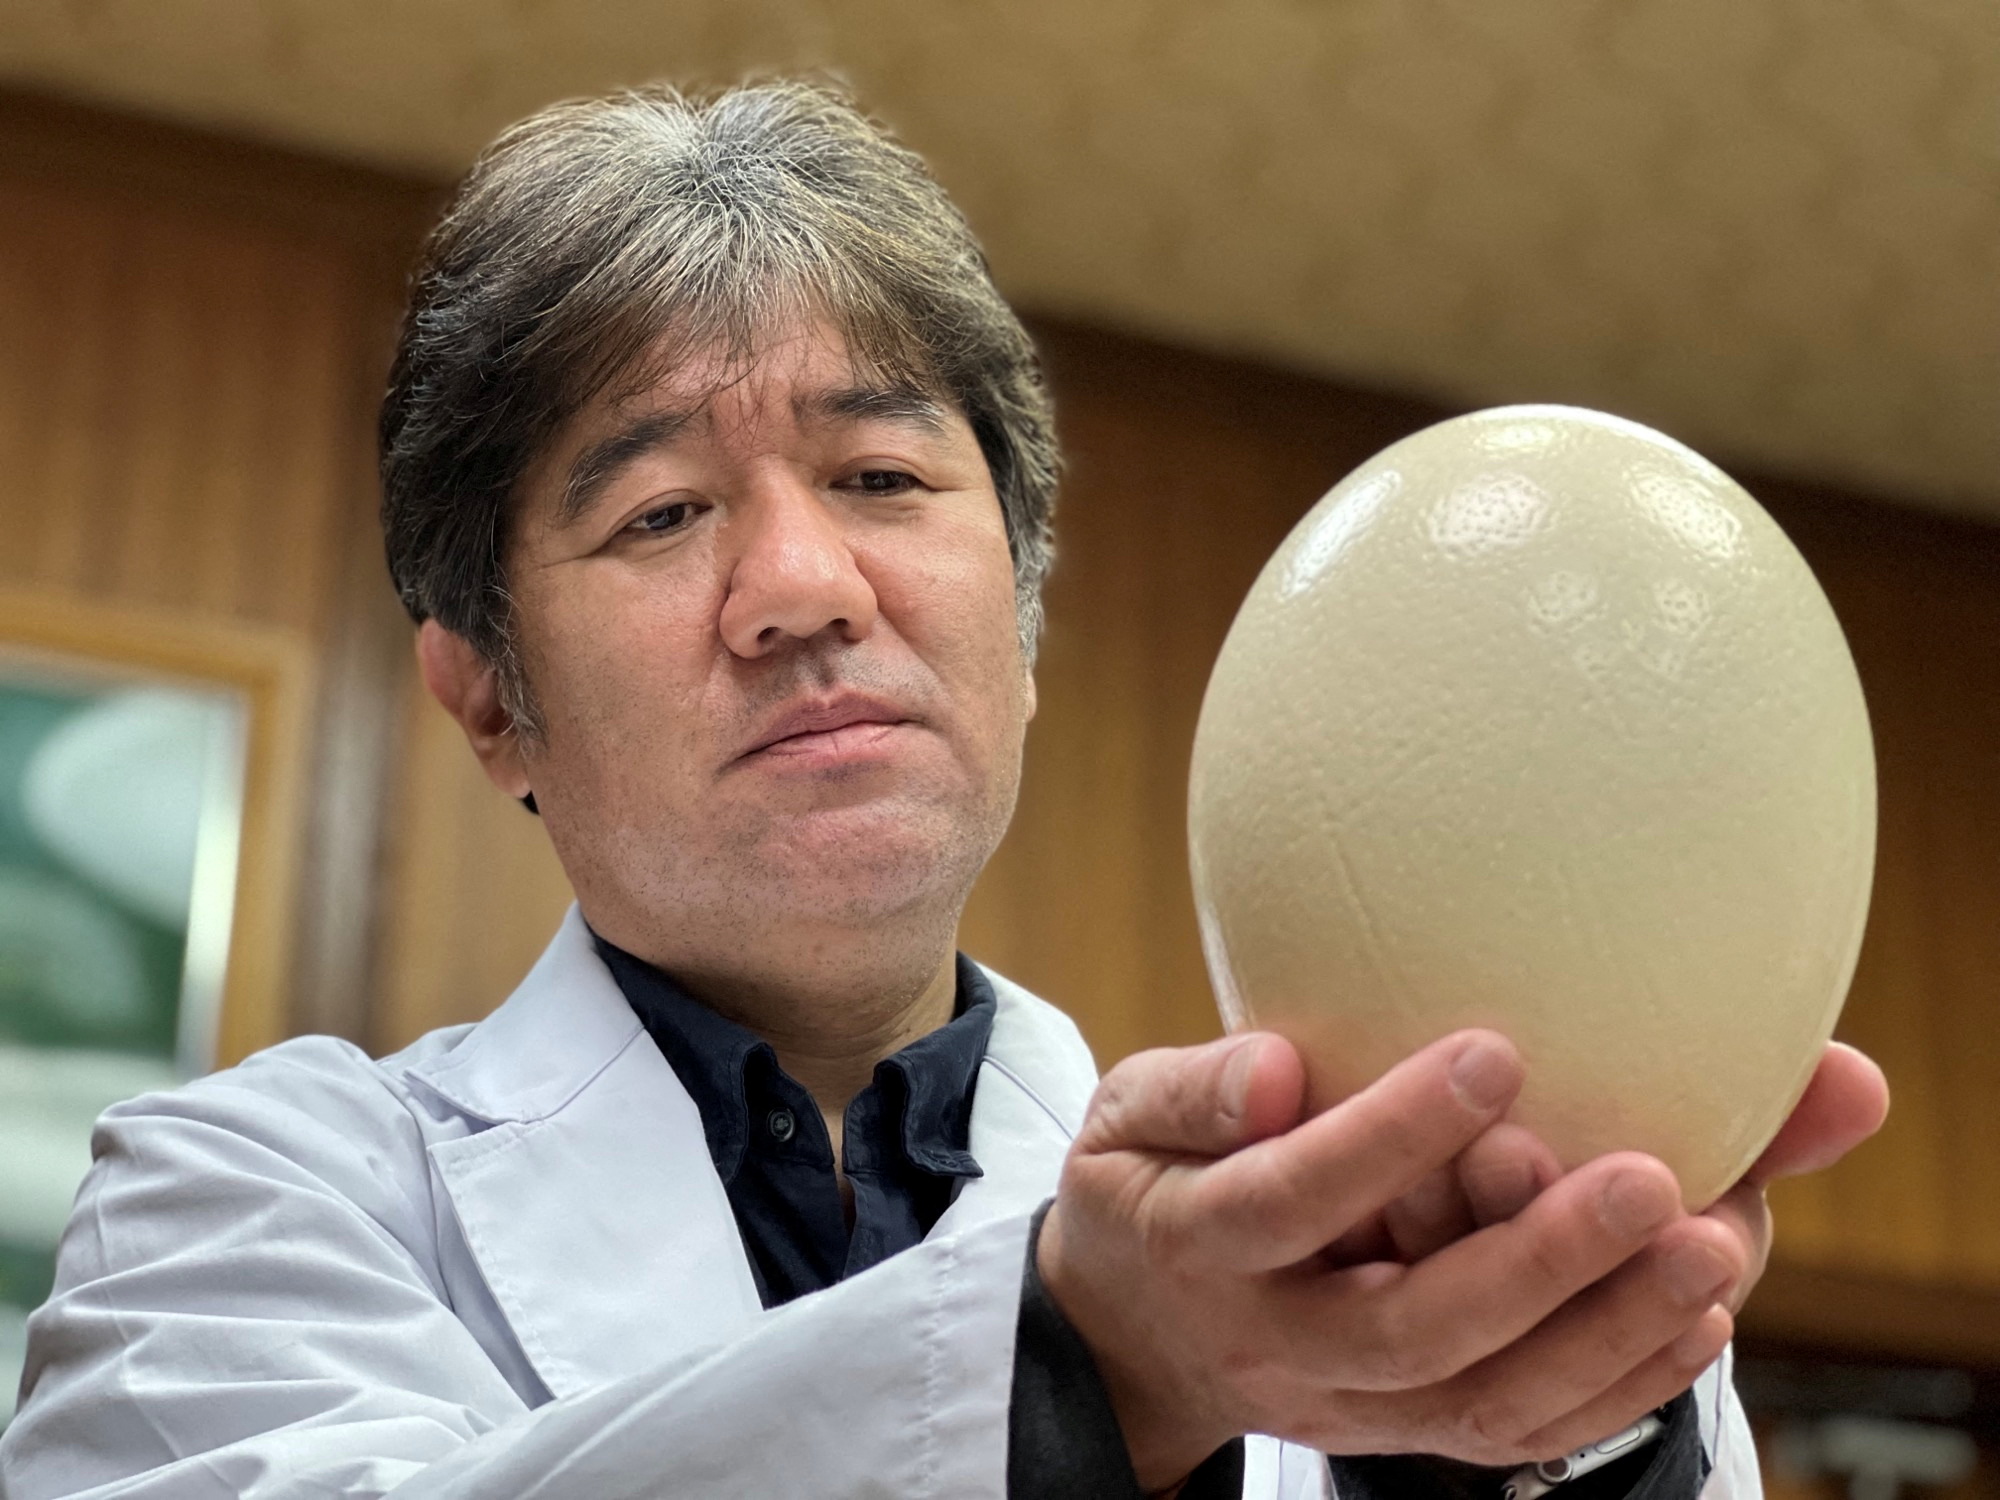 Handout photo shows KPU President Tsukamoto holding ostrich egg in Kyoto